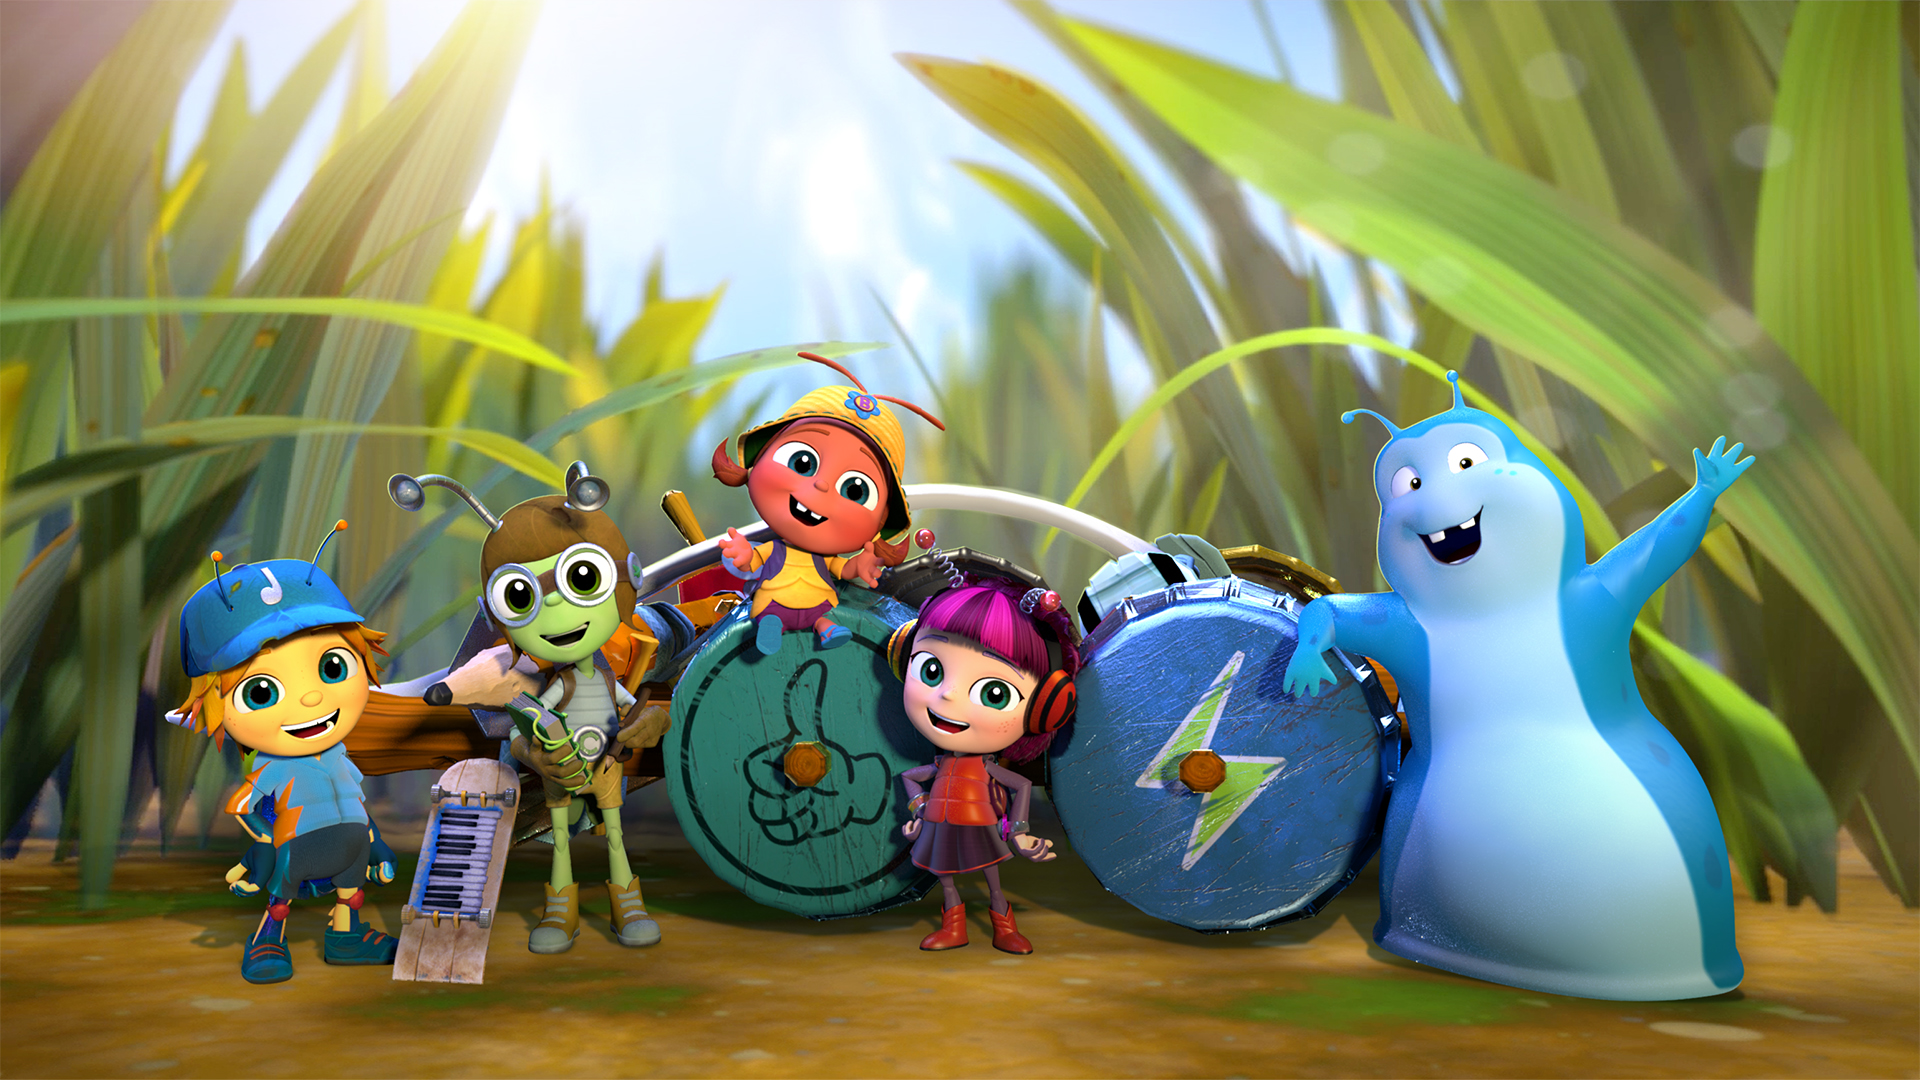 Beat Bugs is an Australian-Canadian animated children's television series